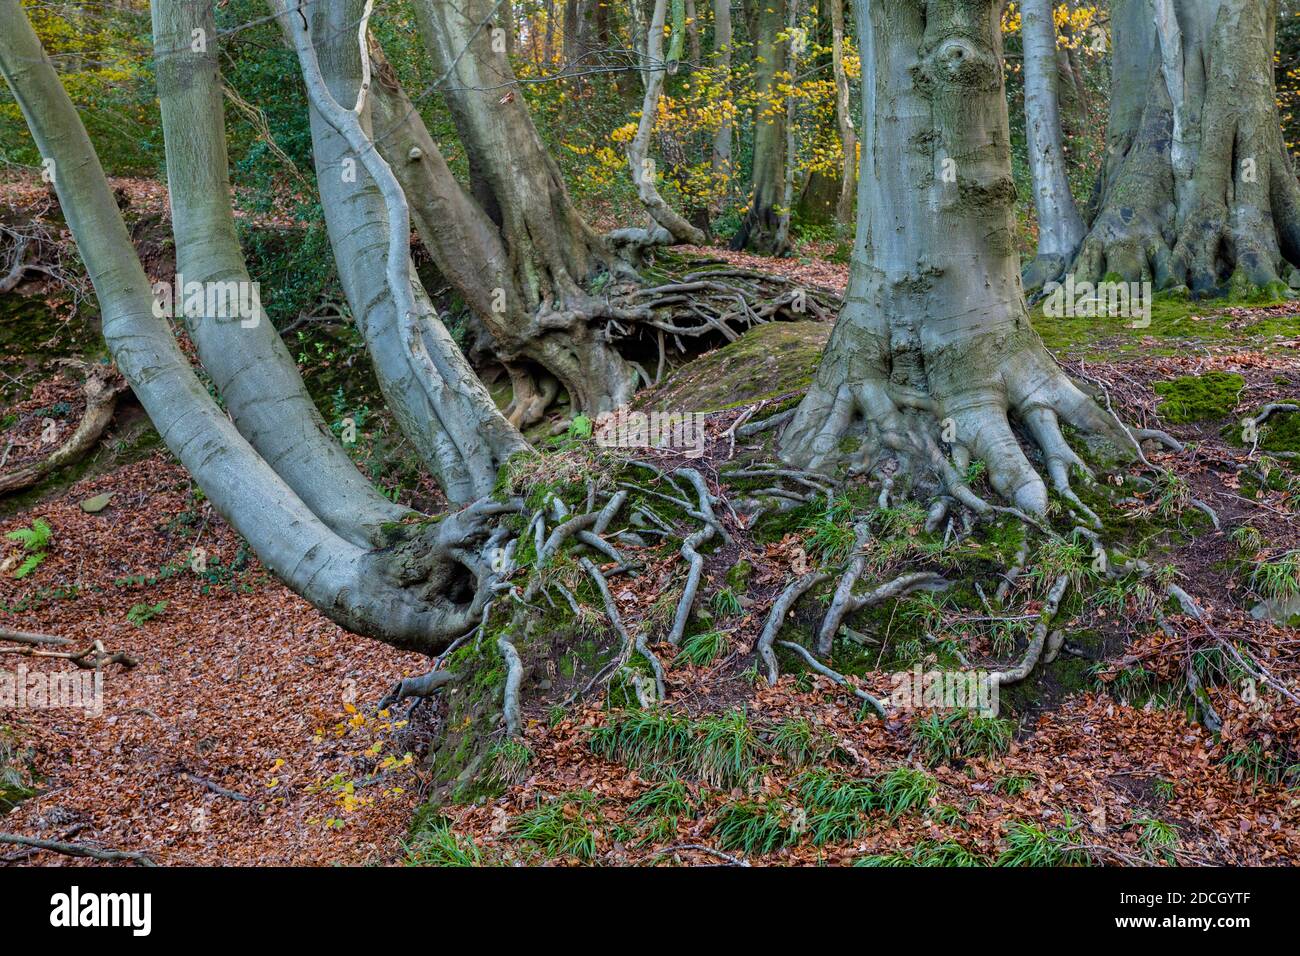 Beech trees with exposed roots due to soil erosion, near Abergavenny, along the Monmouthshire and Brecon Canal. Stock Photo